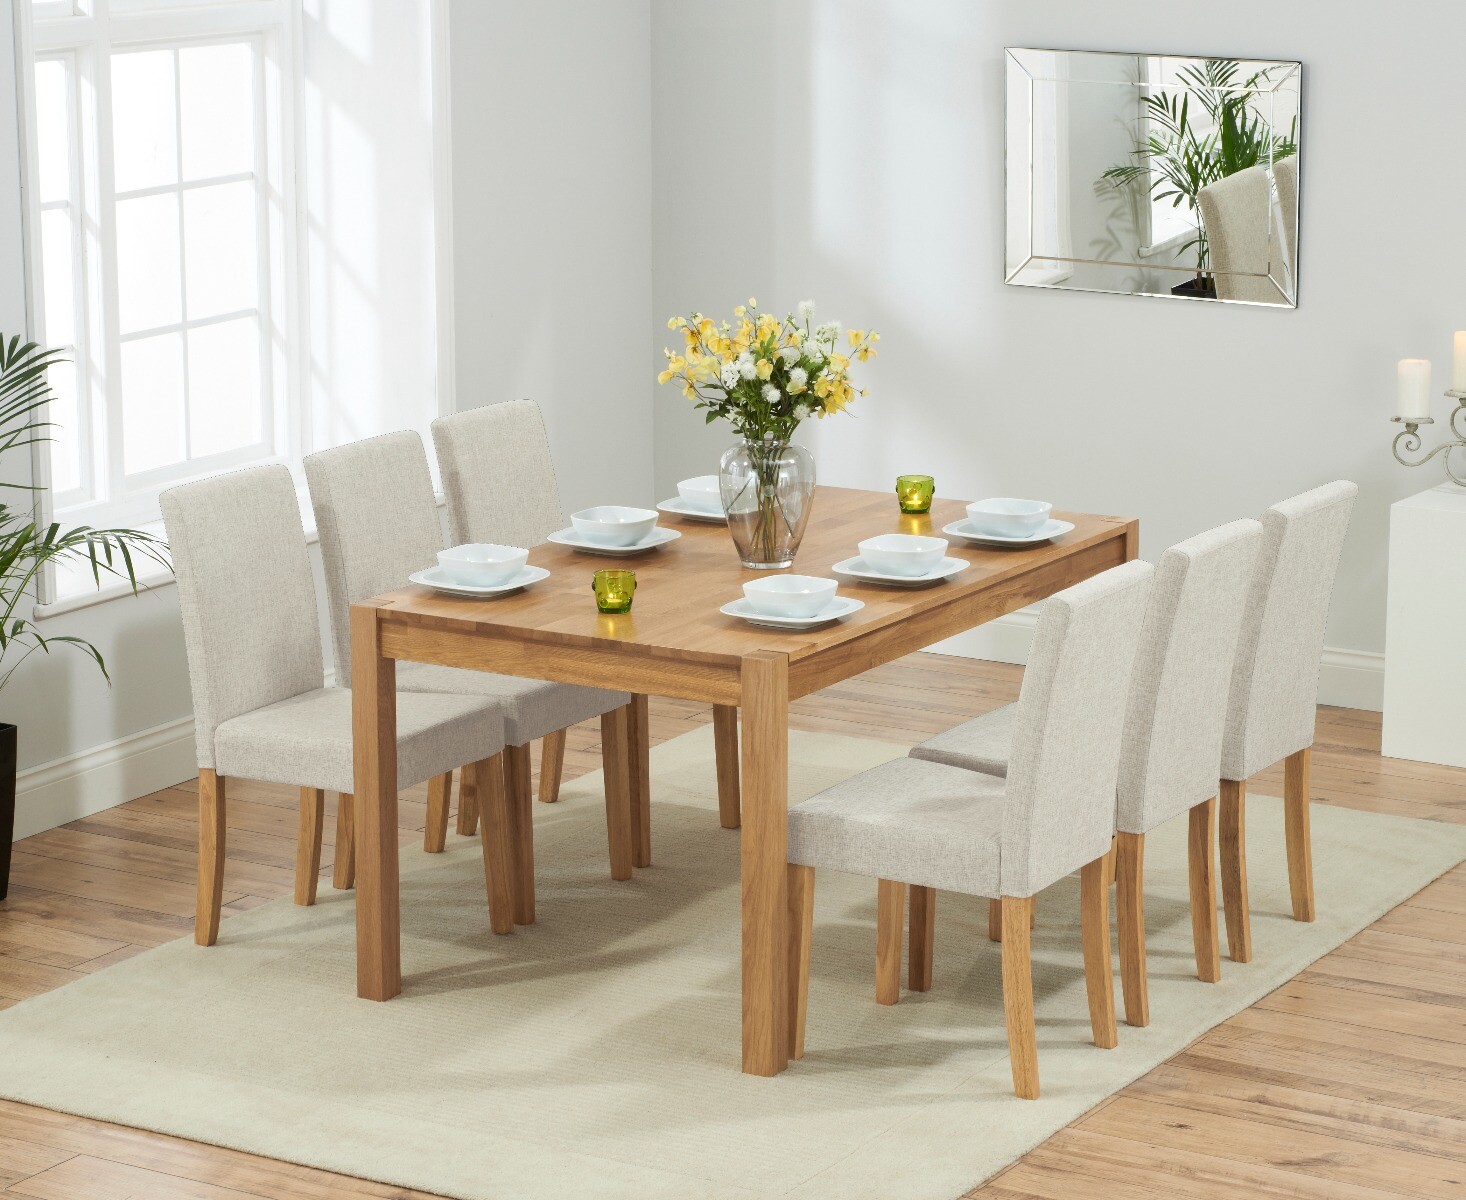 York 150cm Solid Oak Dining Table With 6 Natural Lila Chairs